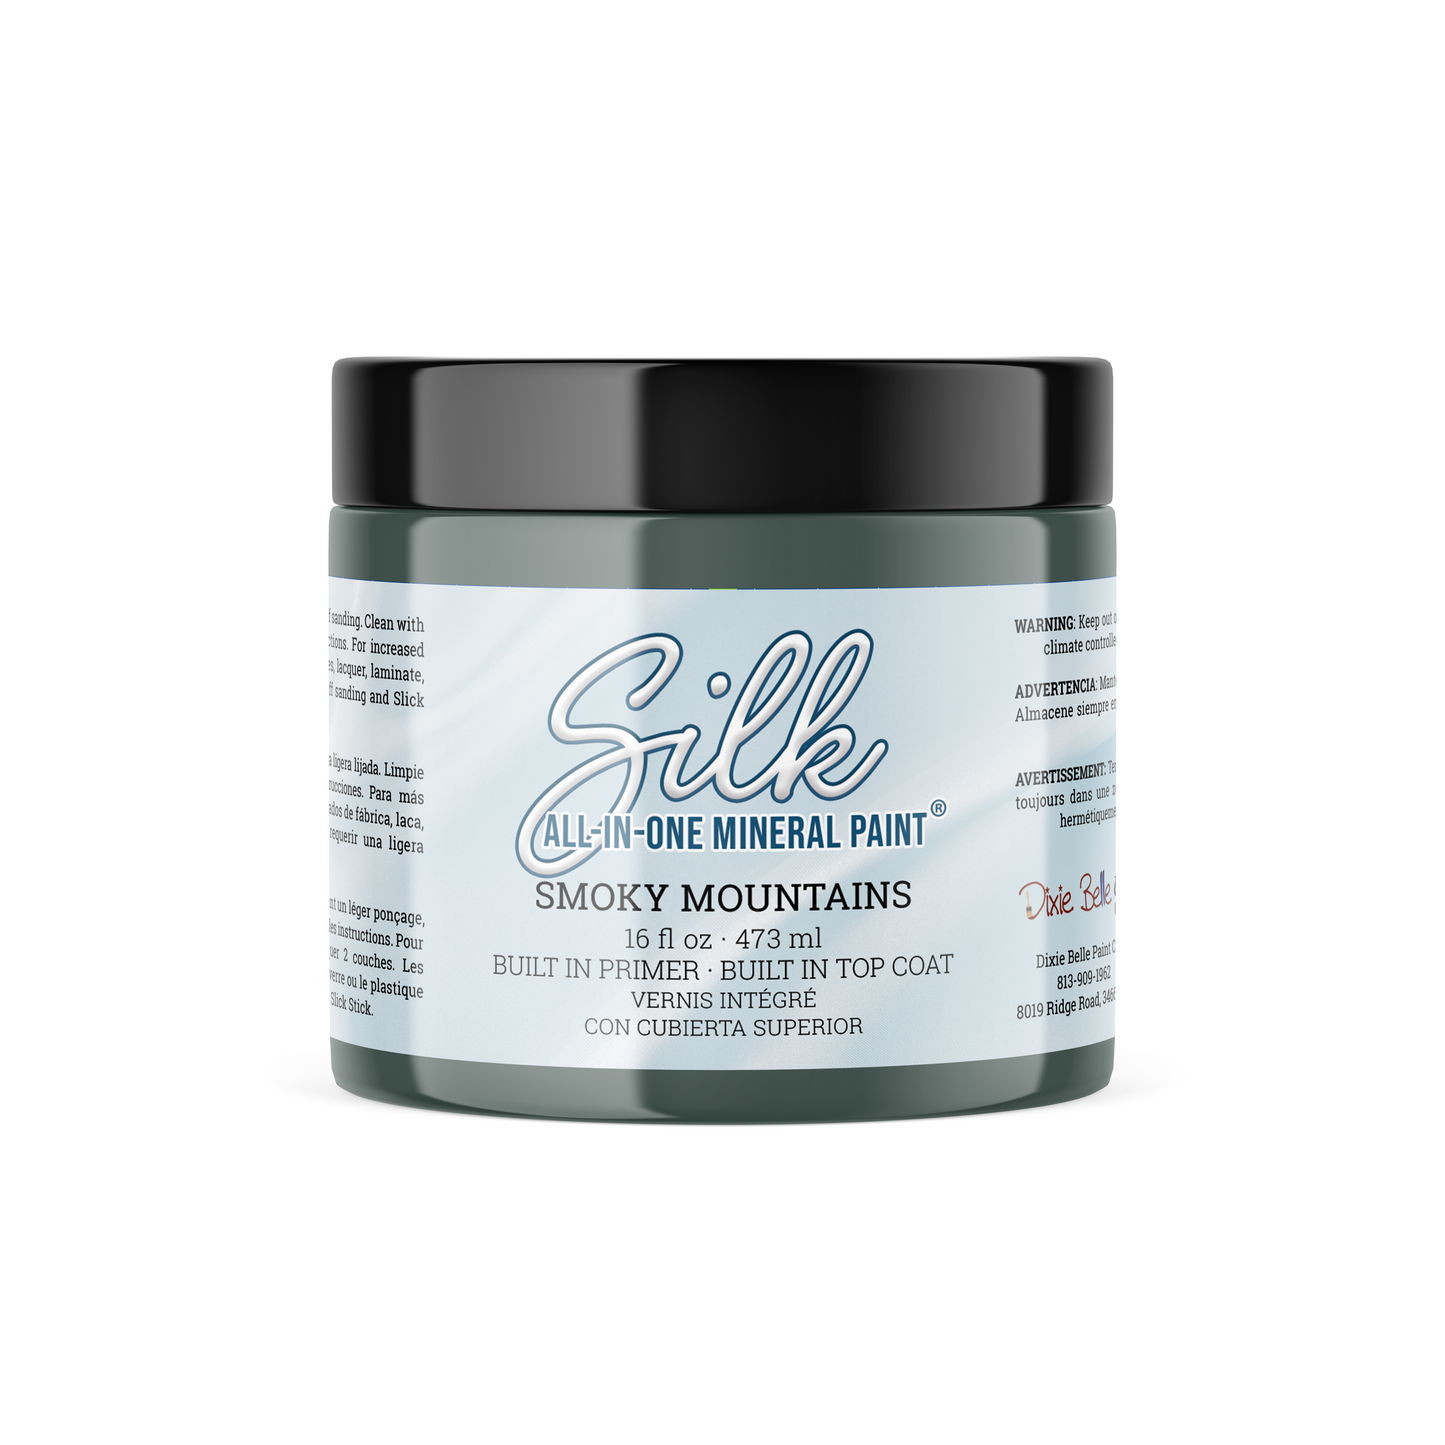 Smoky Mountains Silk All-in-One Mineral Paint